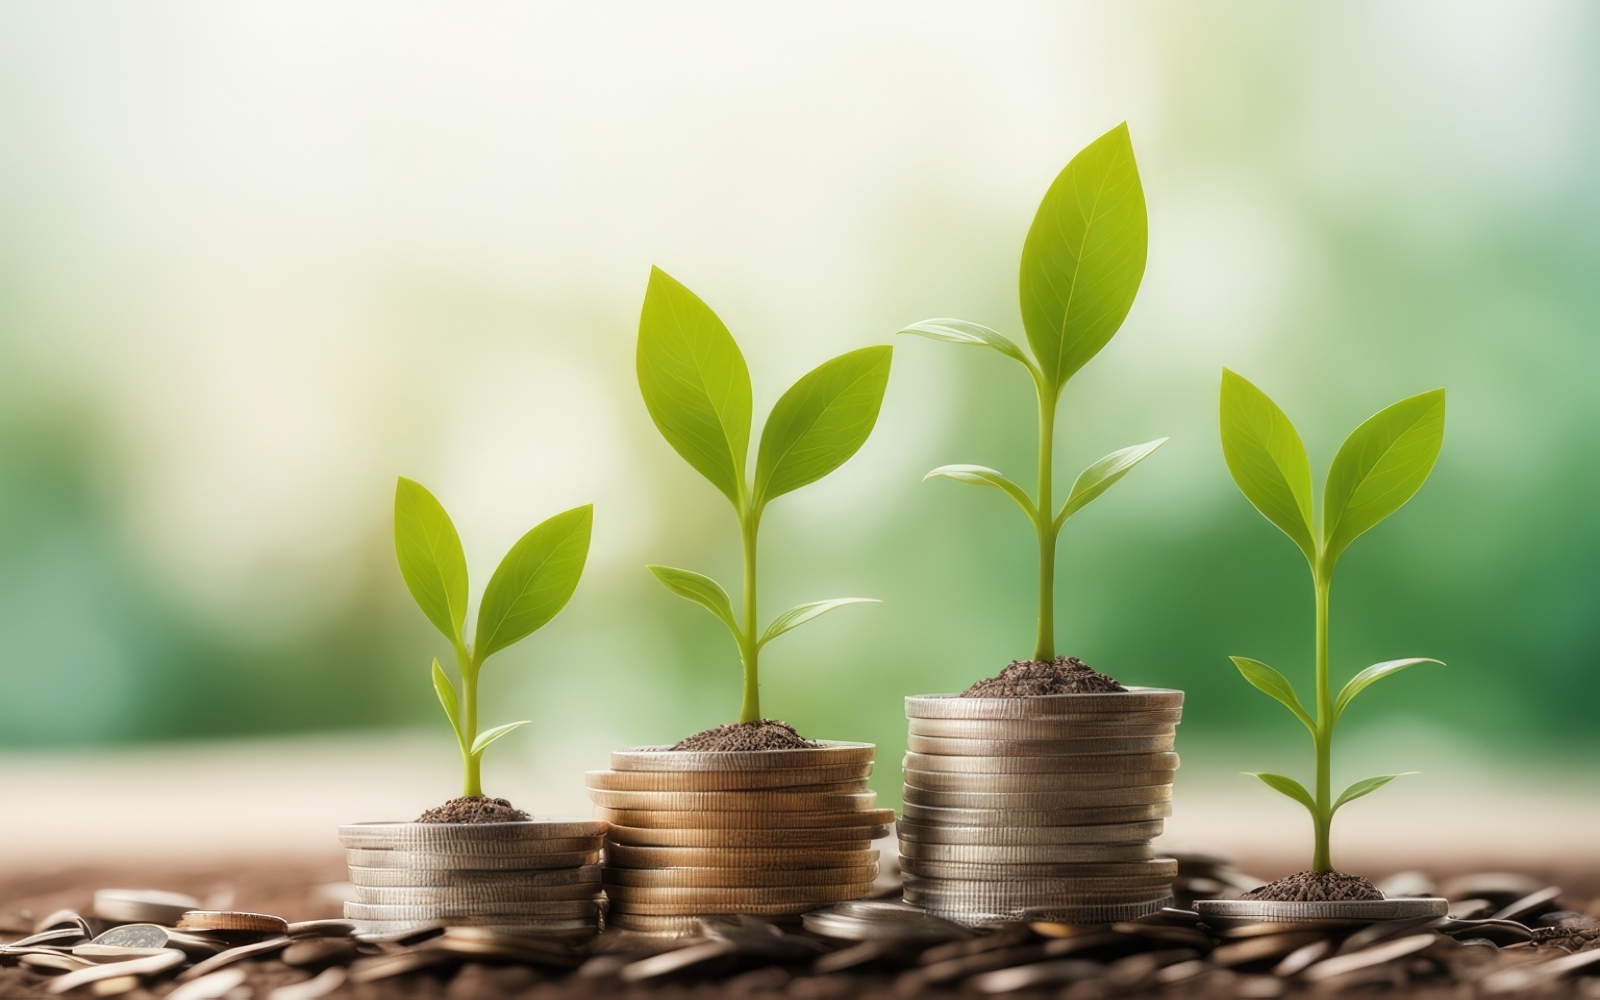 Premium Business Growing Plants on Coins Stacked on Green Blurred Background 27